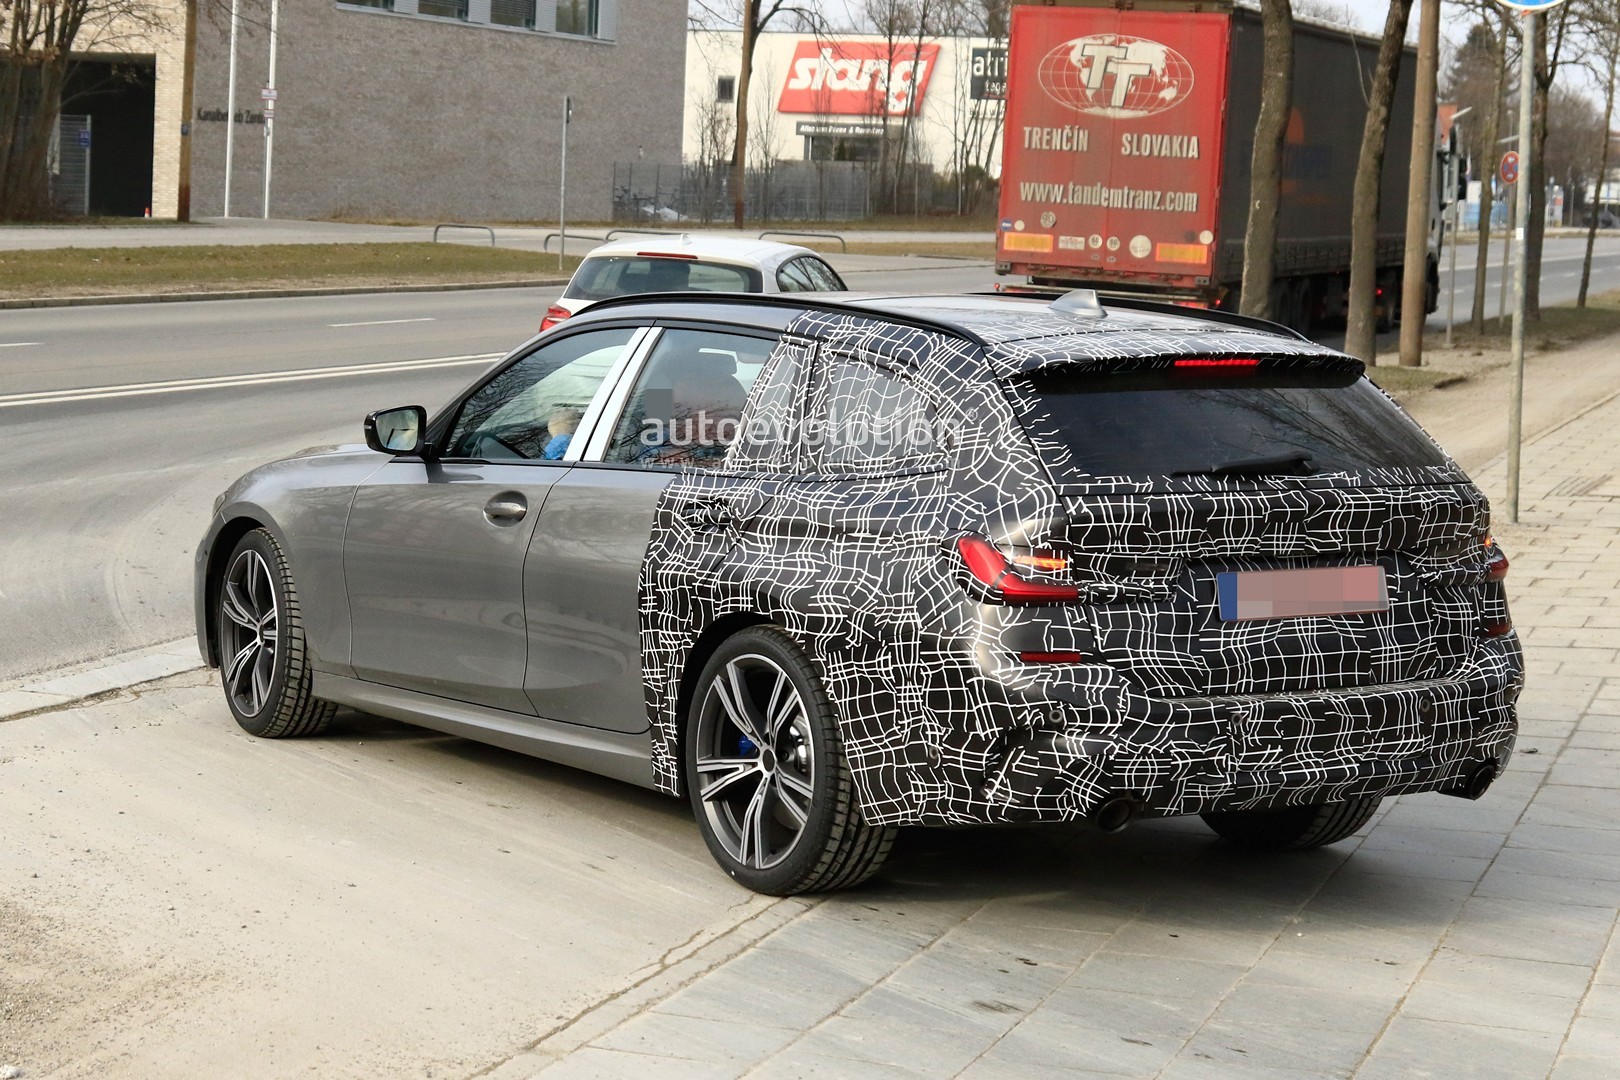 2020-bmw-3-series-touring-spied-winter-testing-with-m-sport-package_20.jpg